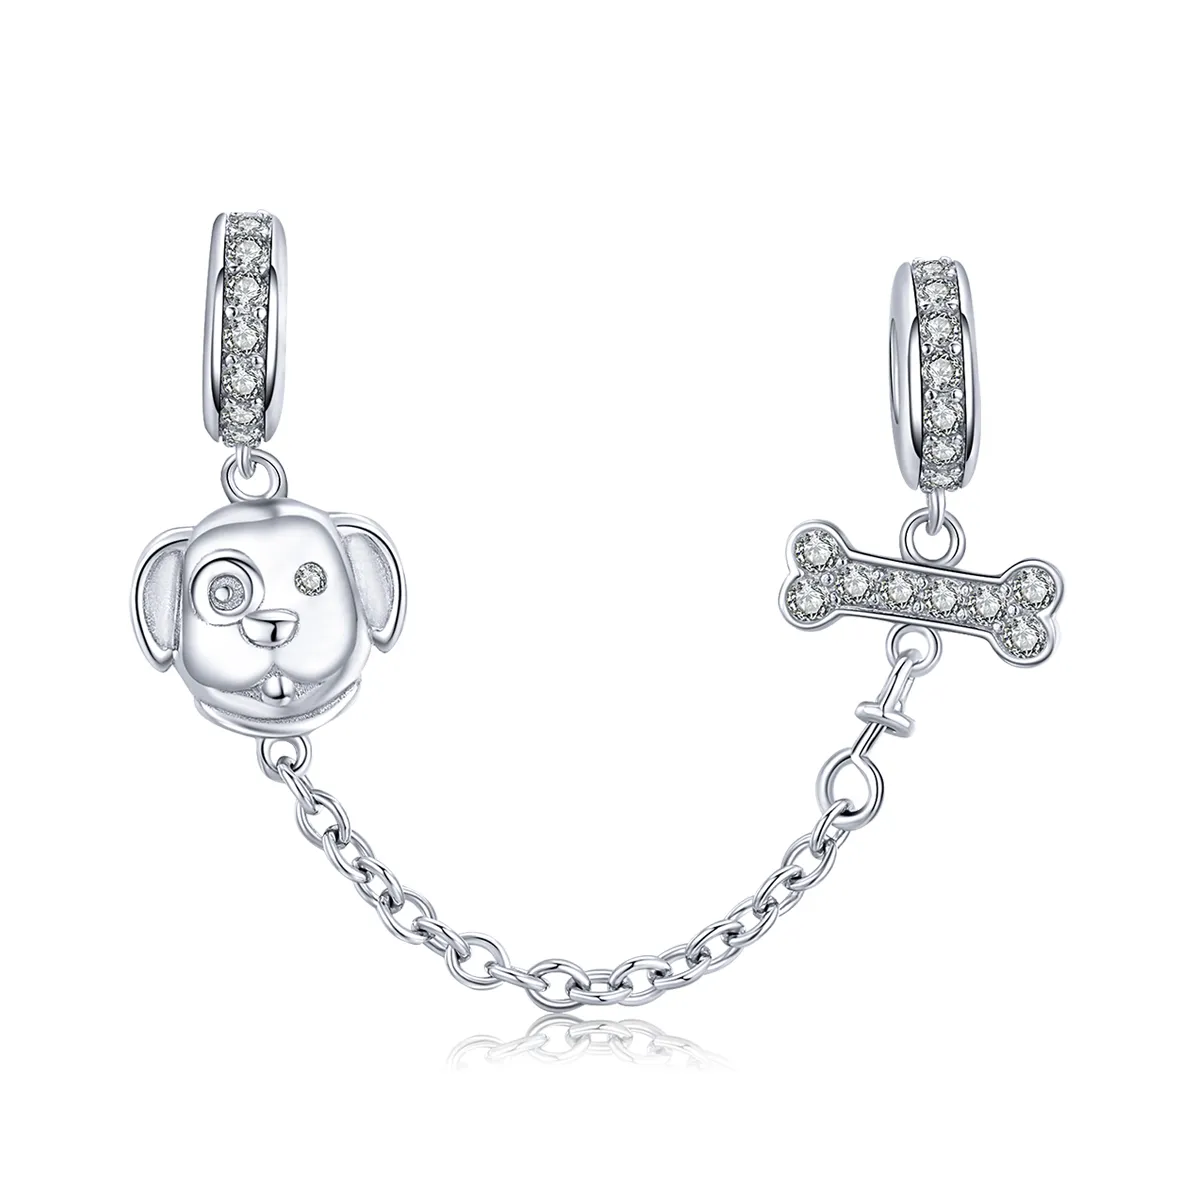 Pandora Style Adorable Puppy Safety Chain - SCC1434